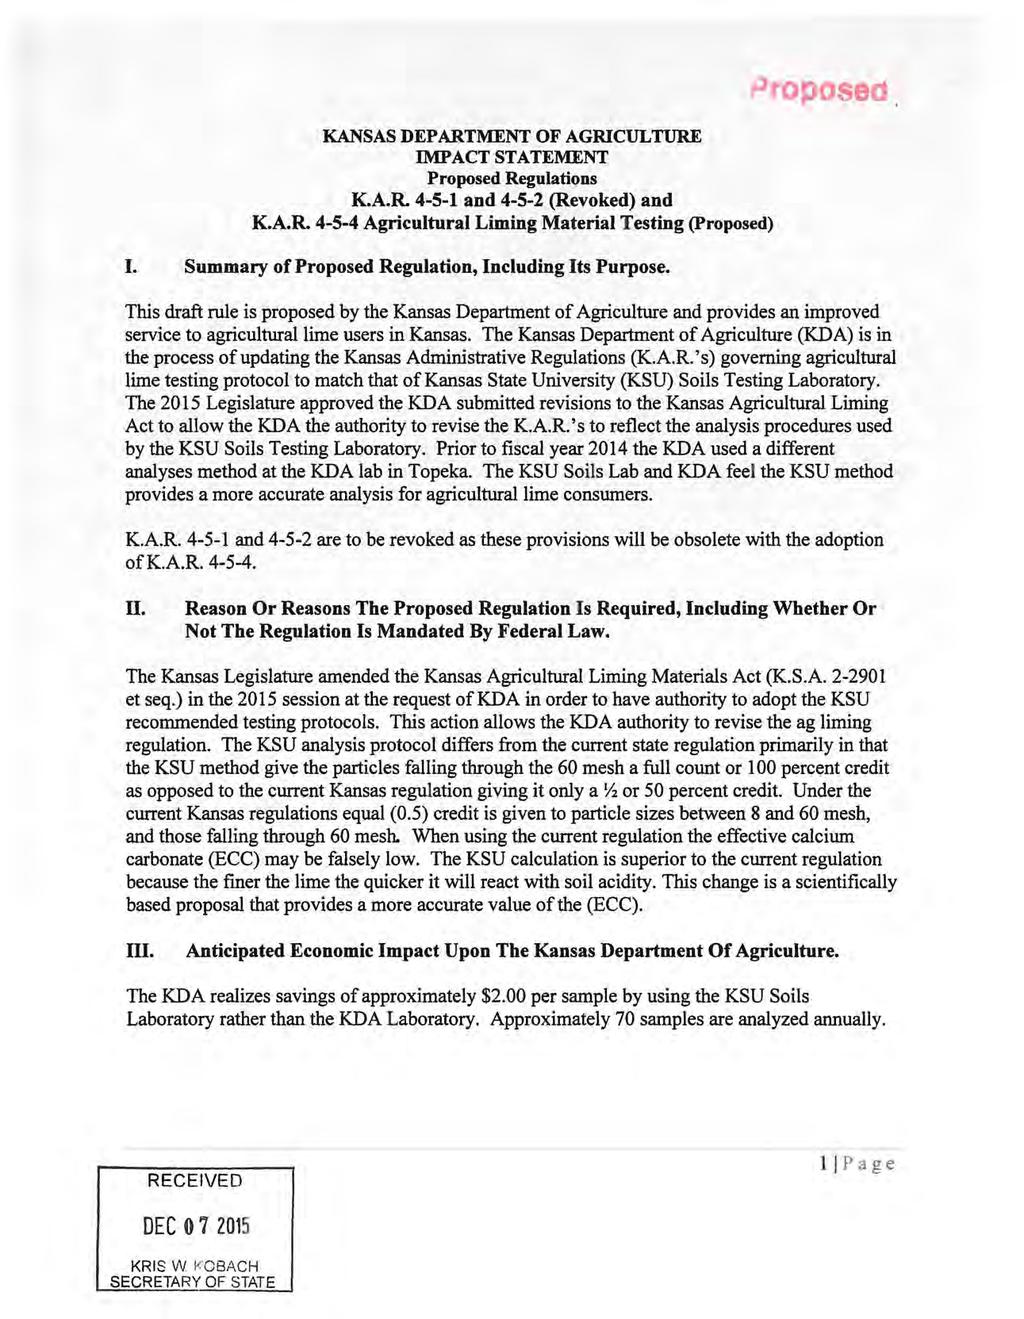 opose KANSAS DEPARTMENT OF AGRICULTURE IMPACT STATEMENT Proposed Regulations K.A.R. 4-5-1 and 4-5-2 (Revoked) and K.A.R. 4-5-4 Agricultural Liming Material Testing (Proposed) I.